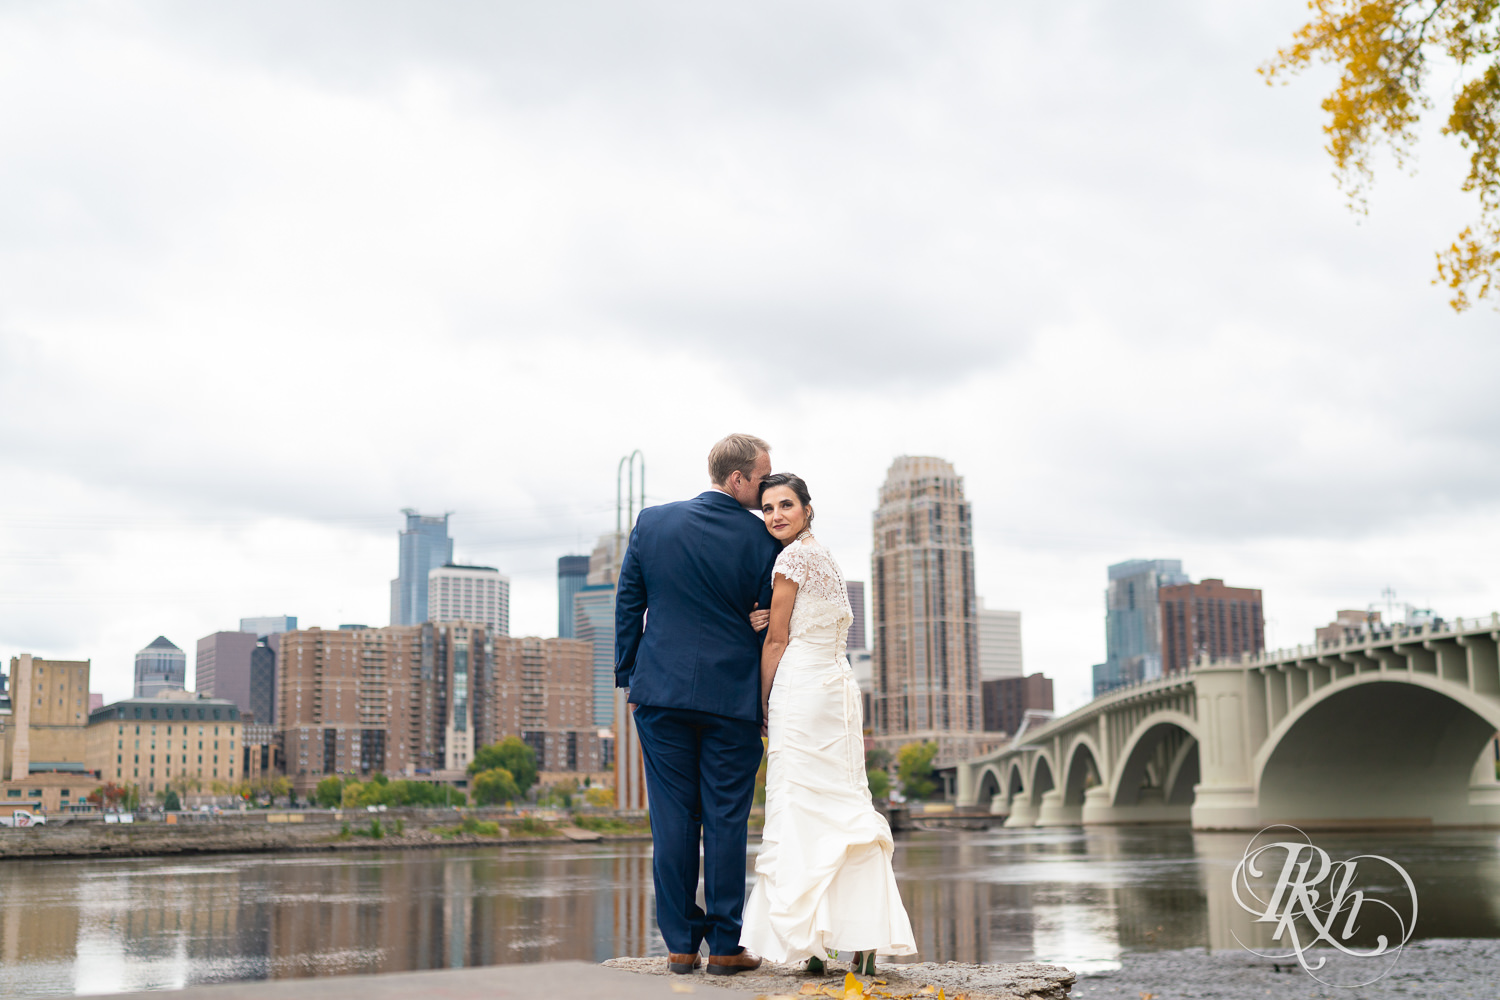 Bride and groom smile in front of the Minneapolis skyline.